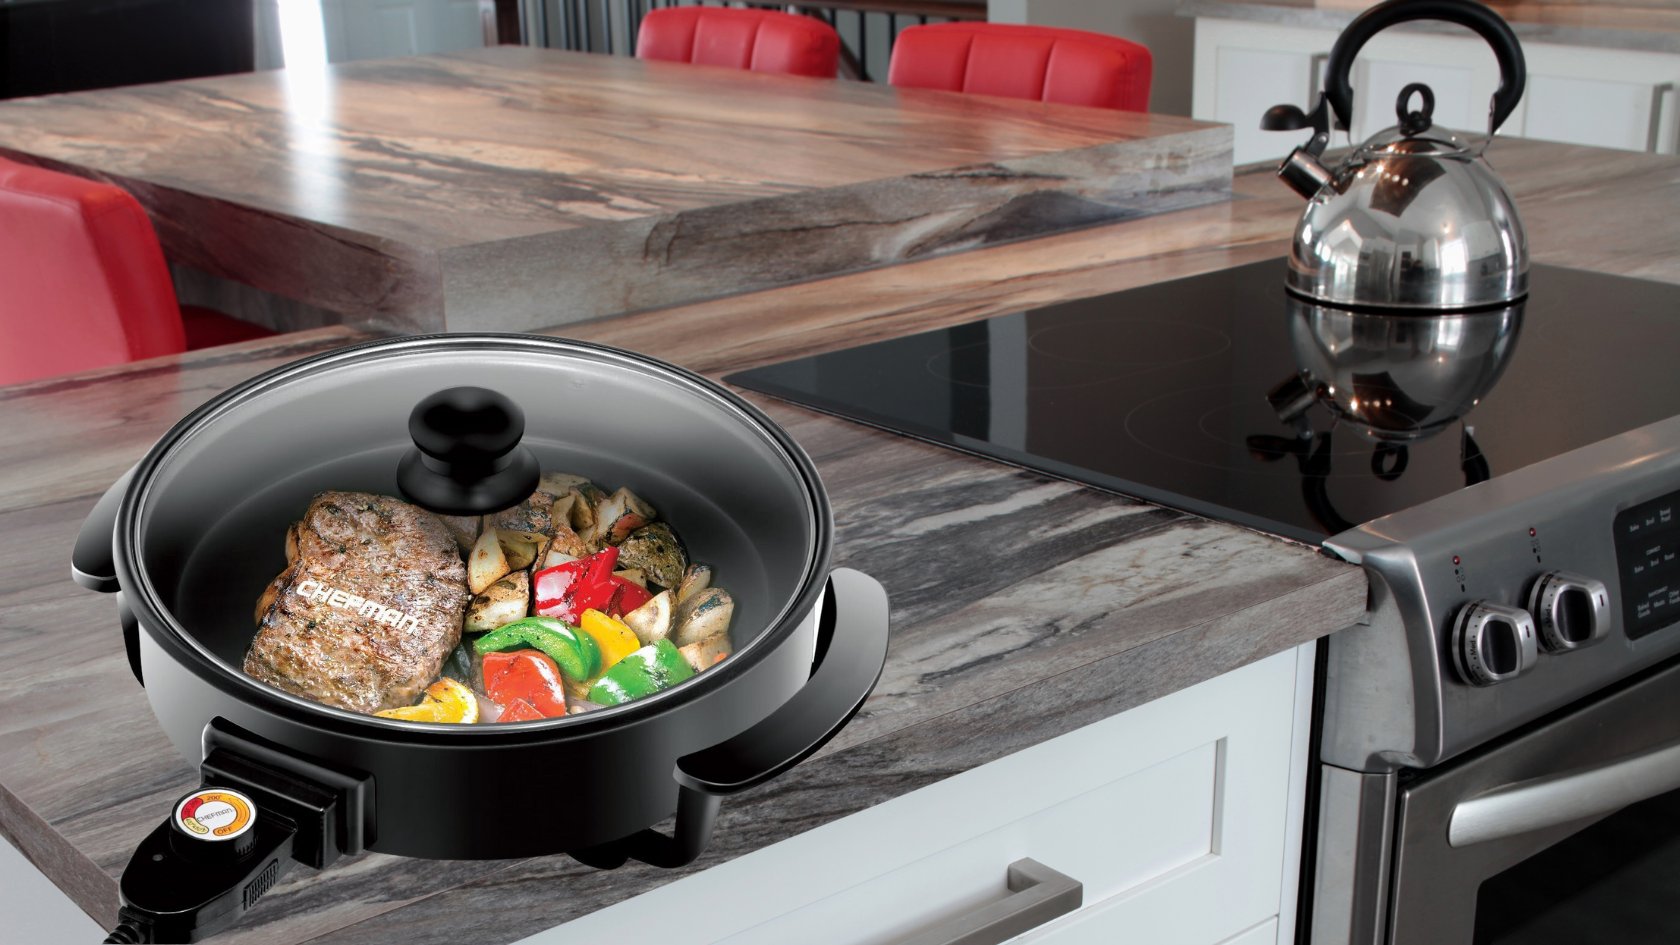 https://storables.com/wp-content/uploads/2023/07/how-to-setup-and-assembly-chefman-12-inch-electric-skillet-how-to-use-1690192063.jpg